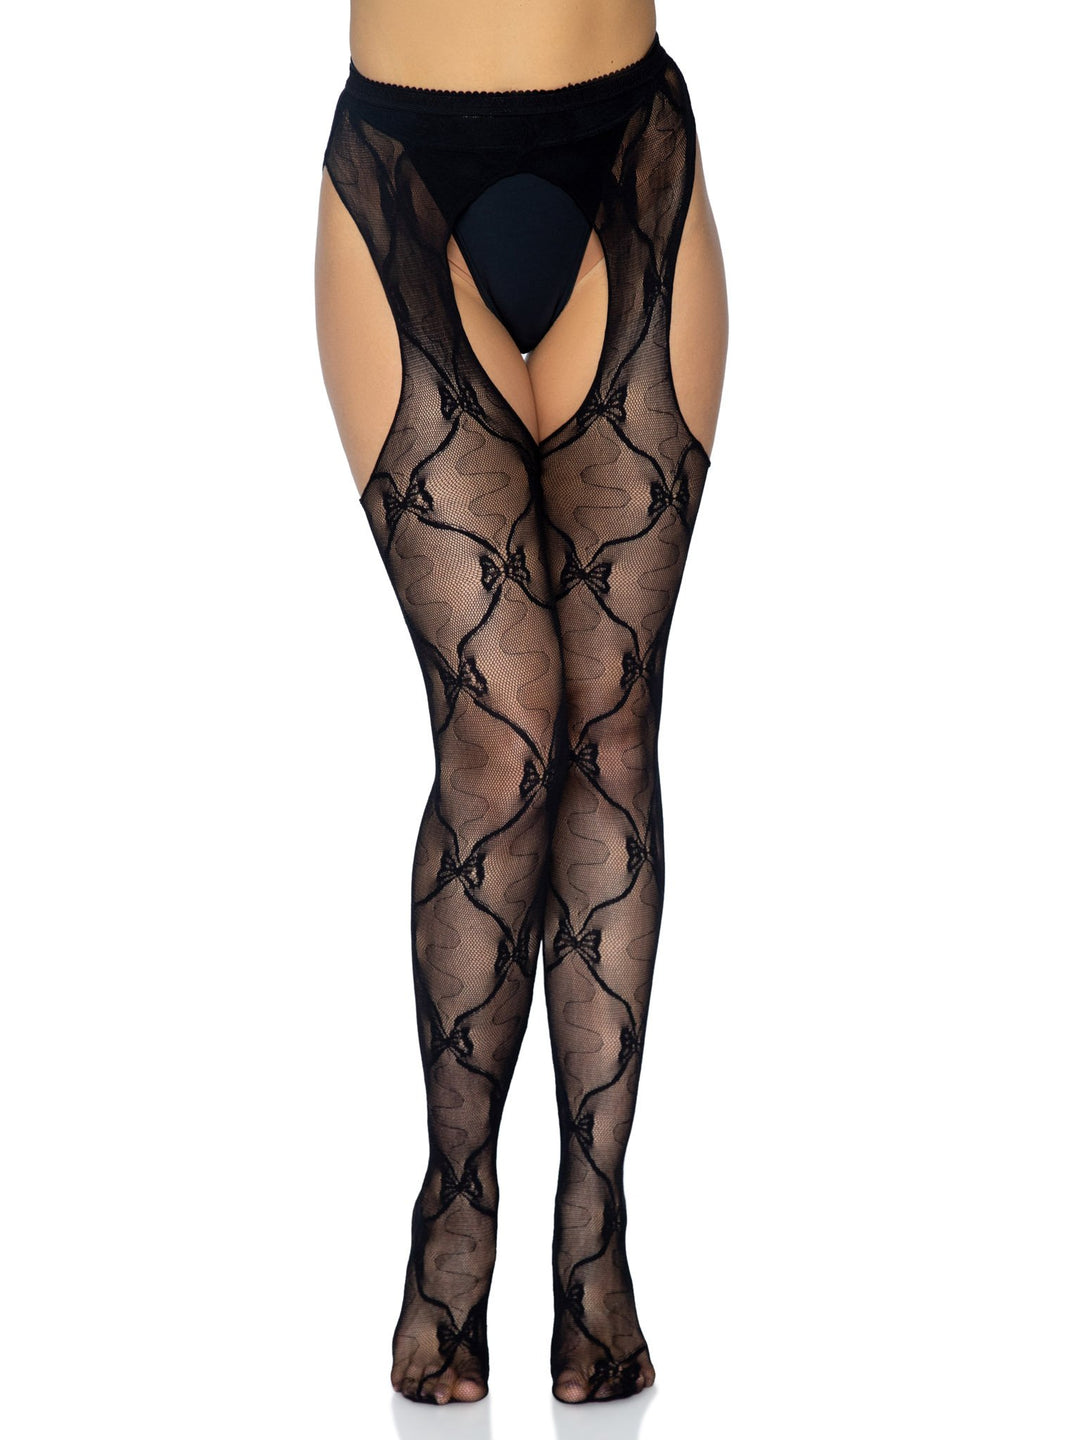 Sheer Suspender Pantyhose with Lace and Bow Accent